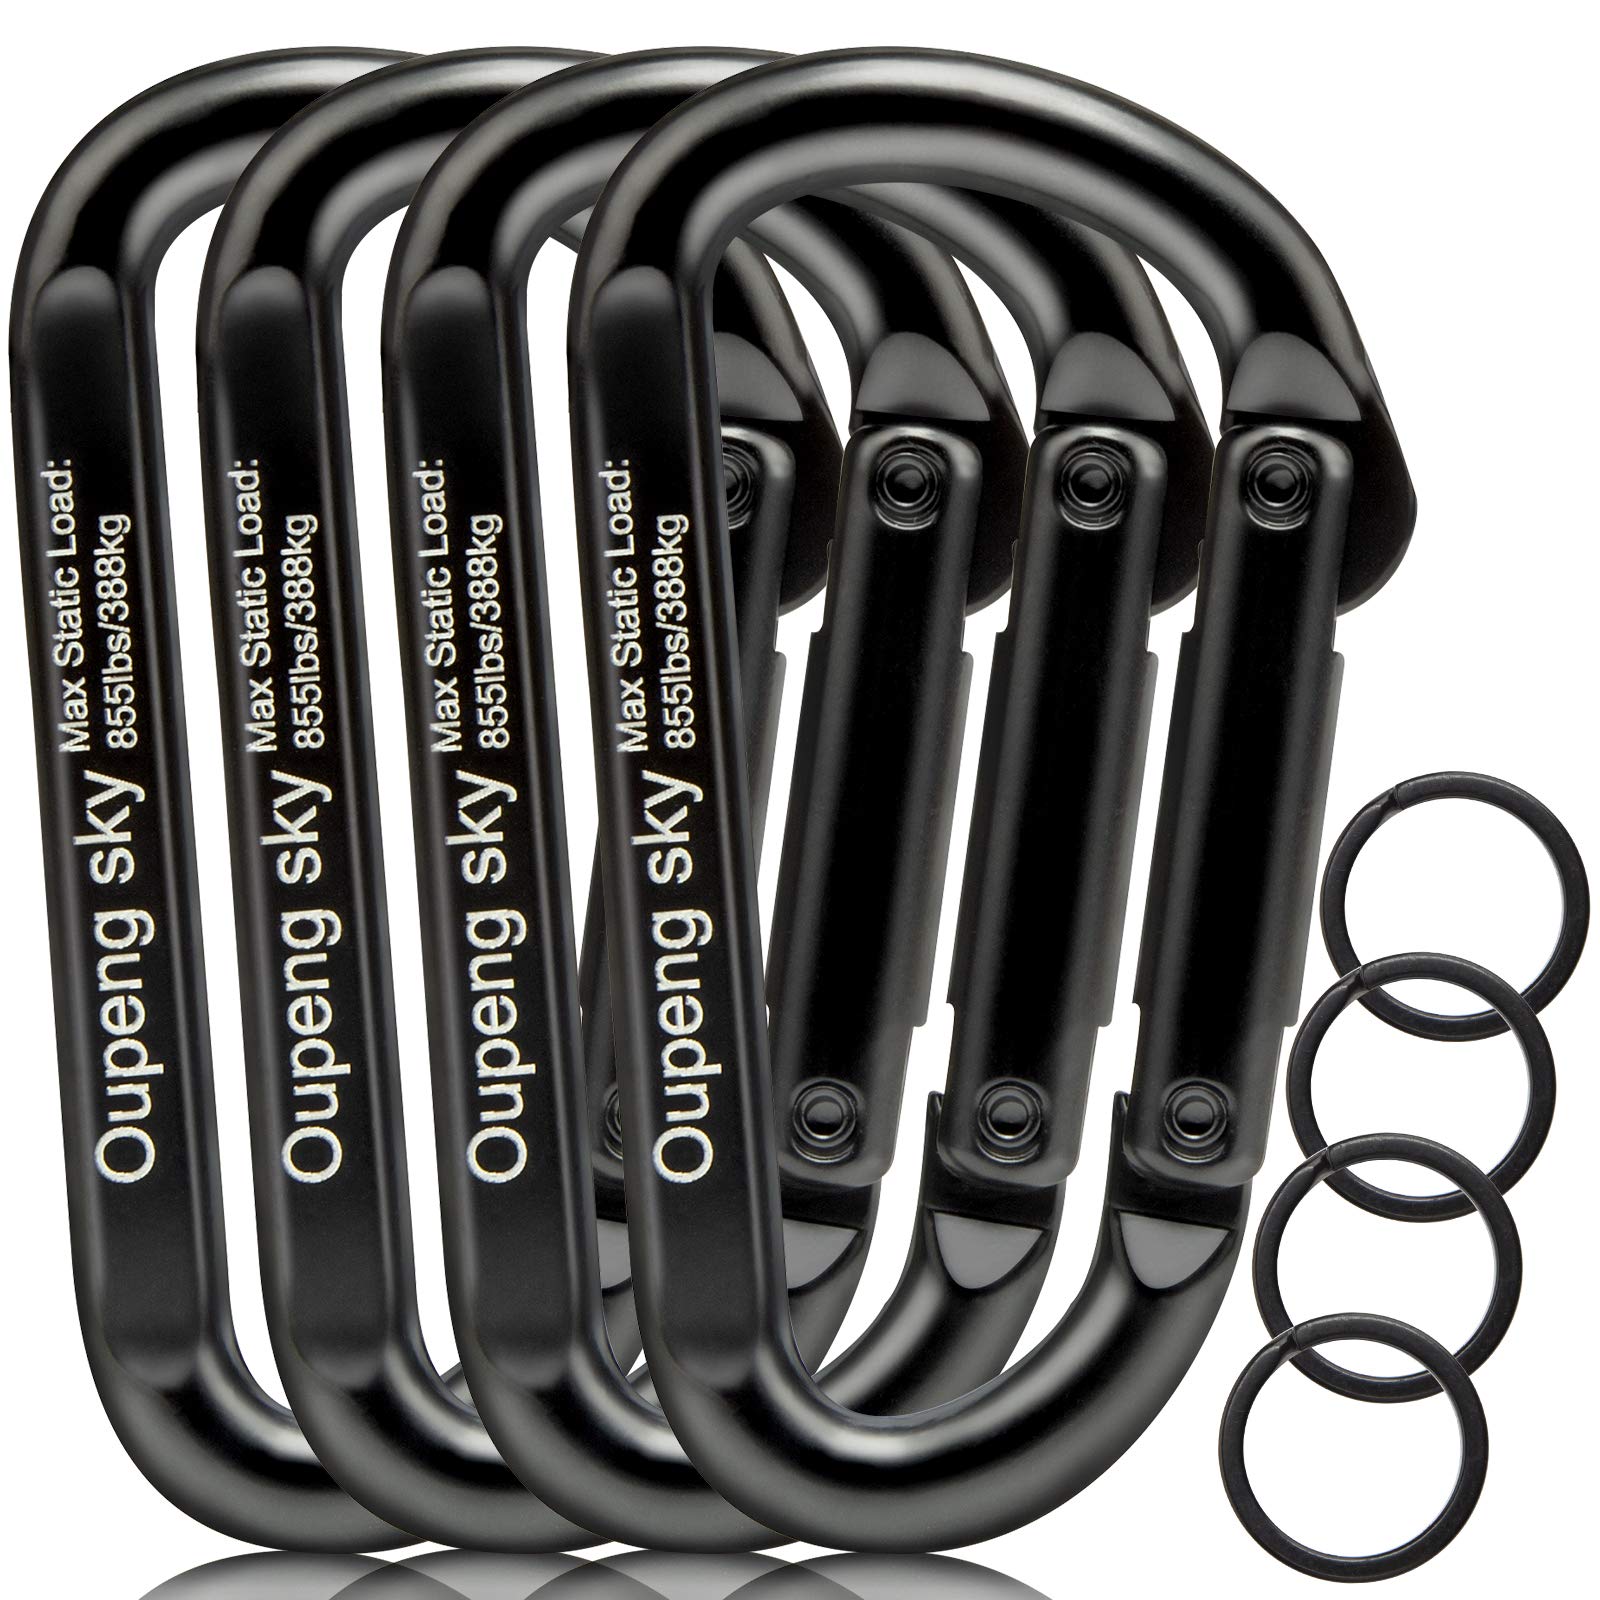 Carabiner Clip,855lbs,3 Heavy Duty D Ring Caribeener Clips,Carabiner  Keychain Caribeaners for Hammocks,Camping,Hiking,Outdoors,Gym,Small  Carabiners for Dog Leash,Harness,Key Ring, Black 4